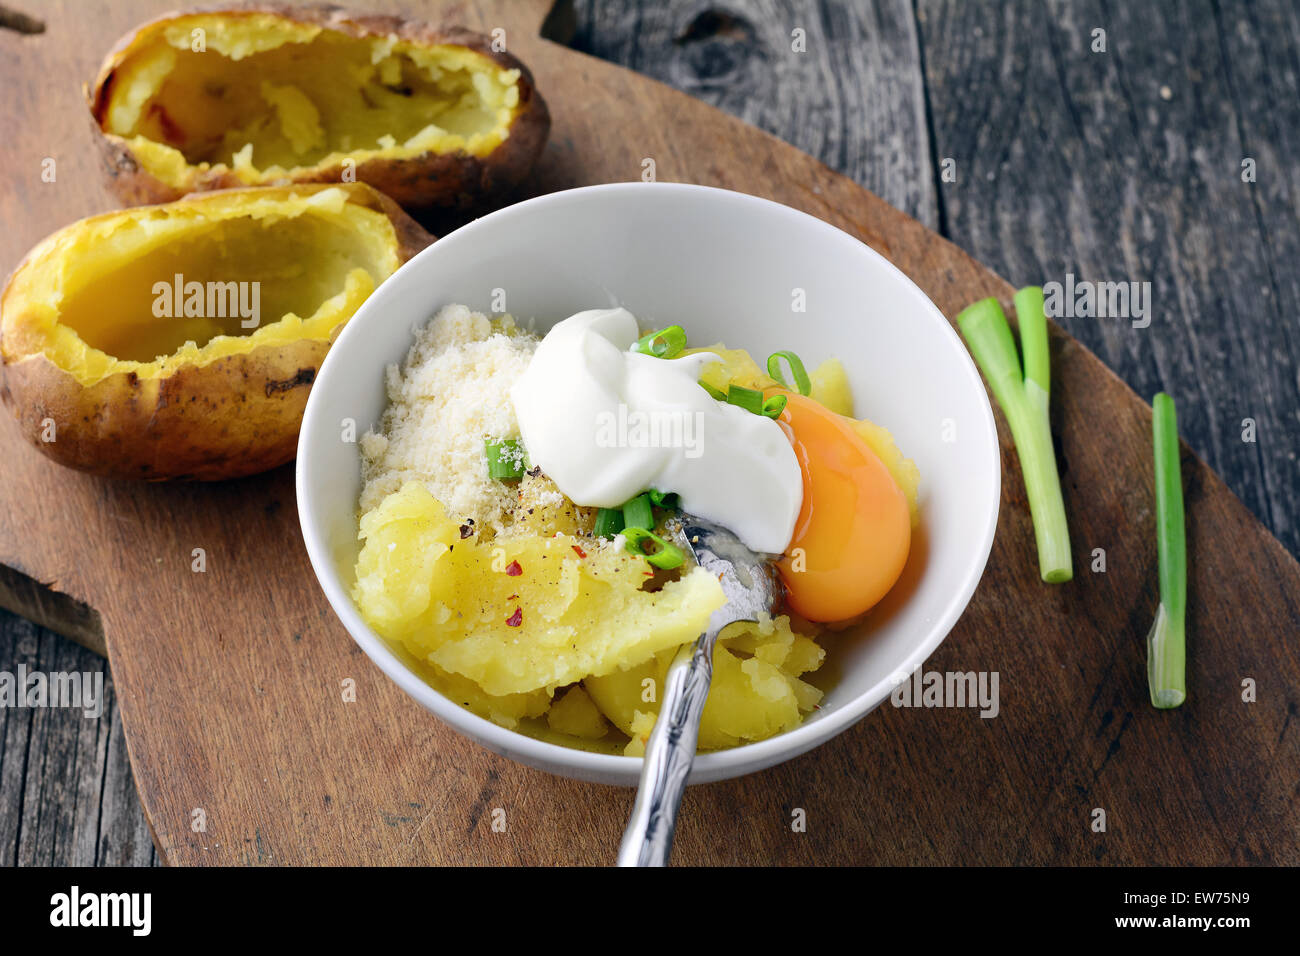 Preparation of jacket potatoes with sour cream, onion, cheese, and egg Stock Photo